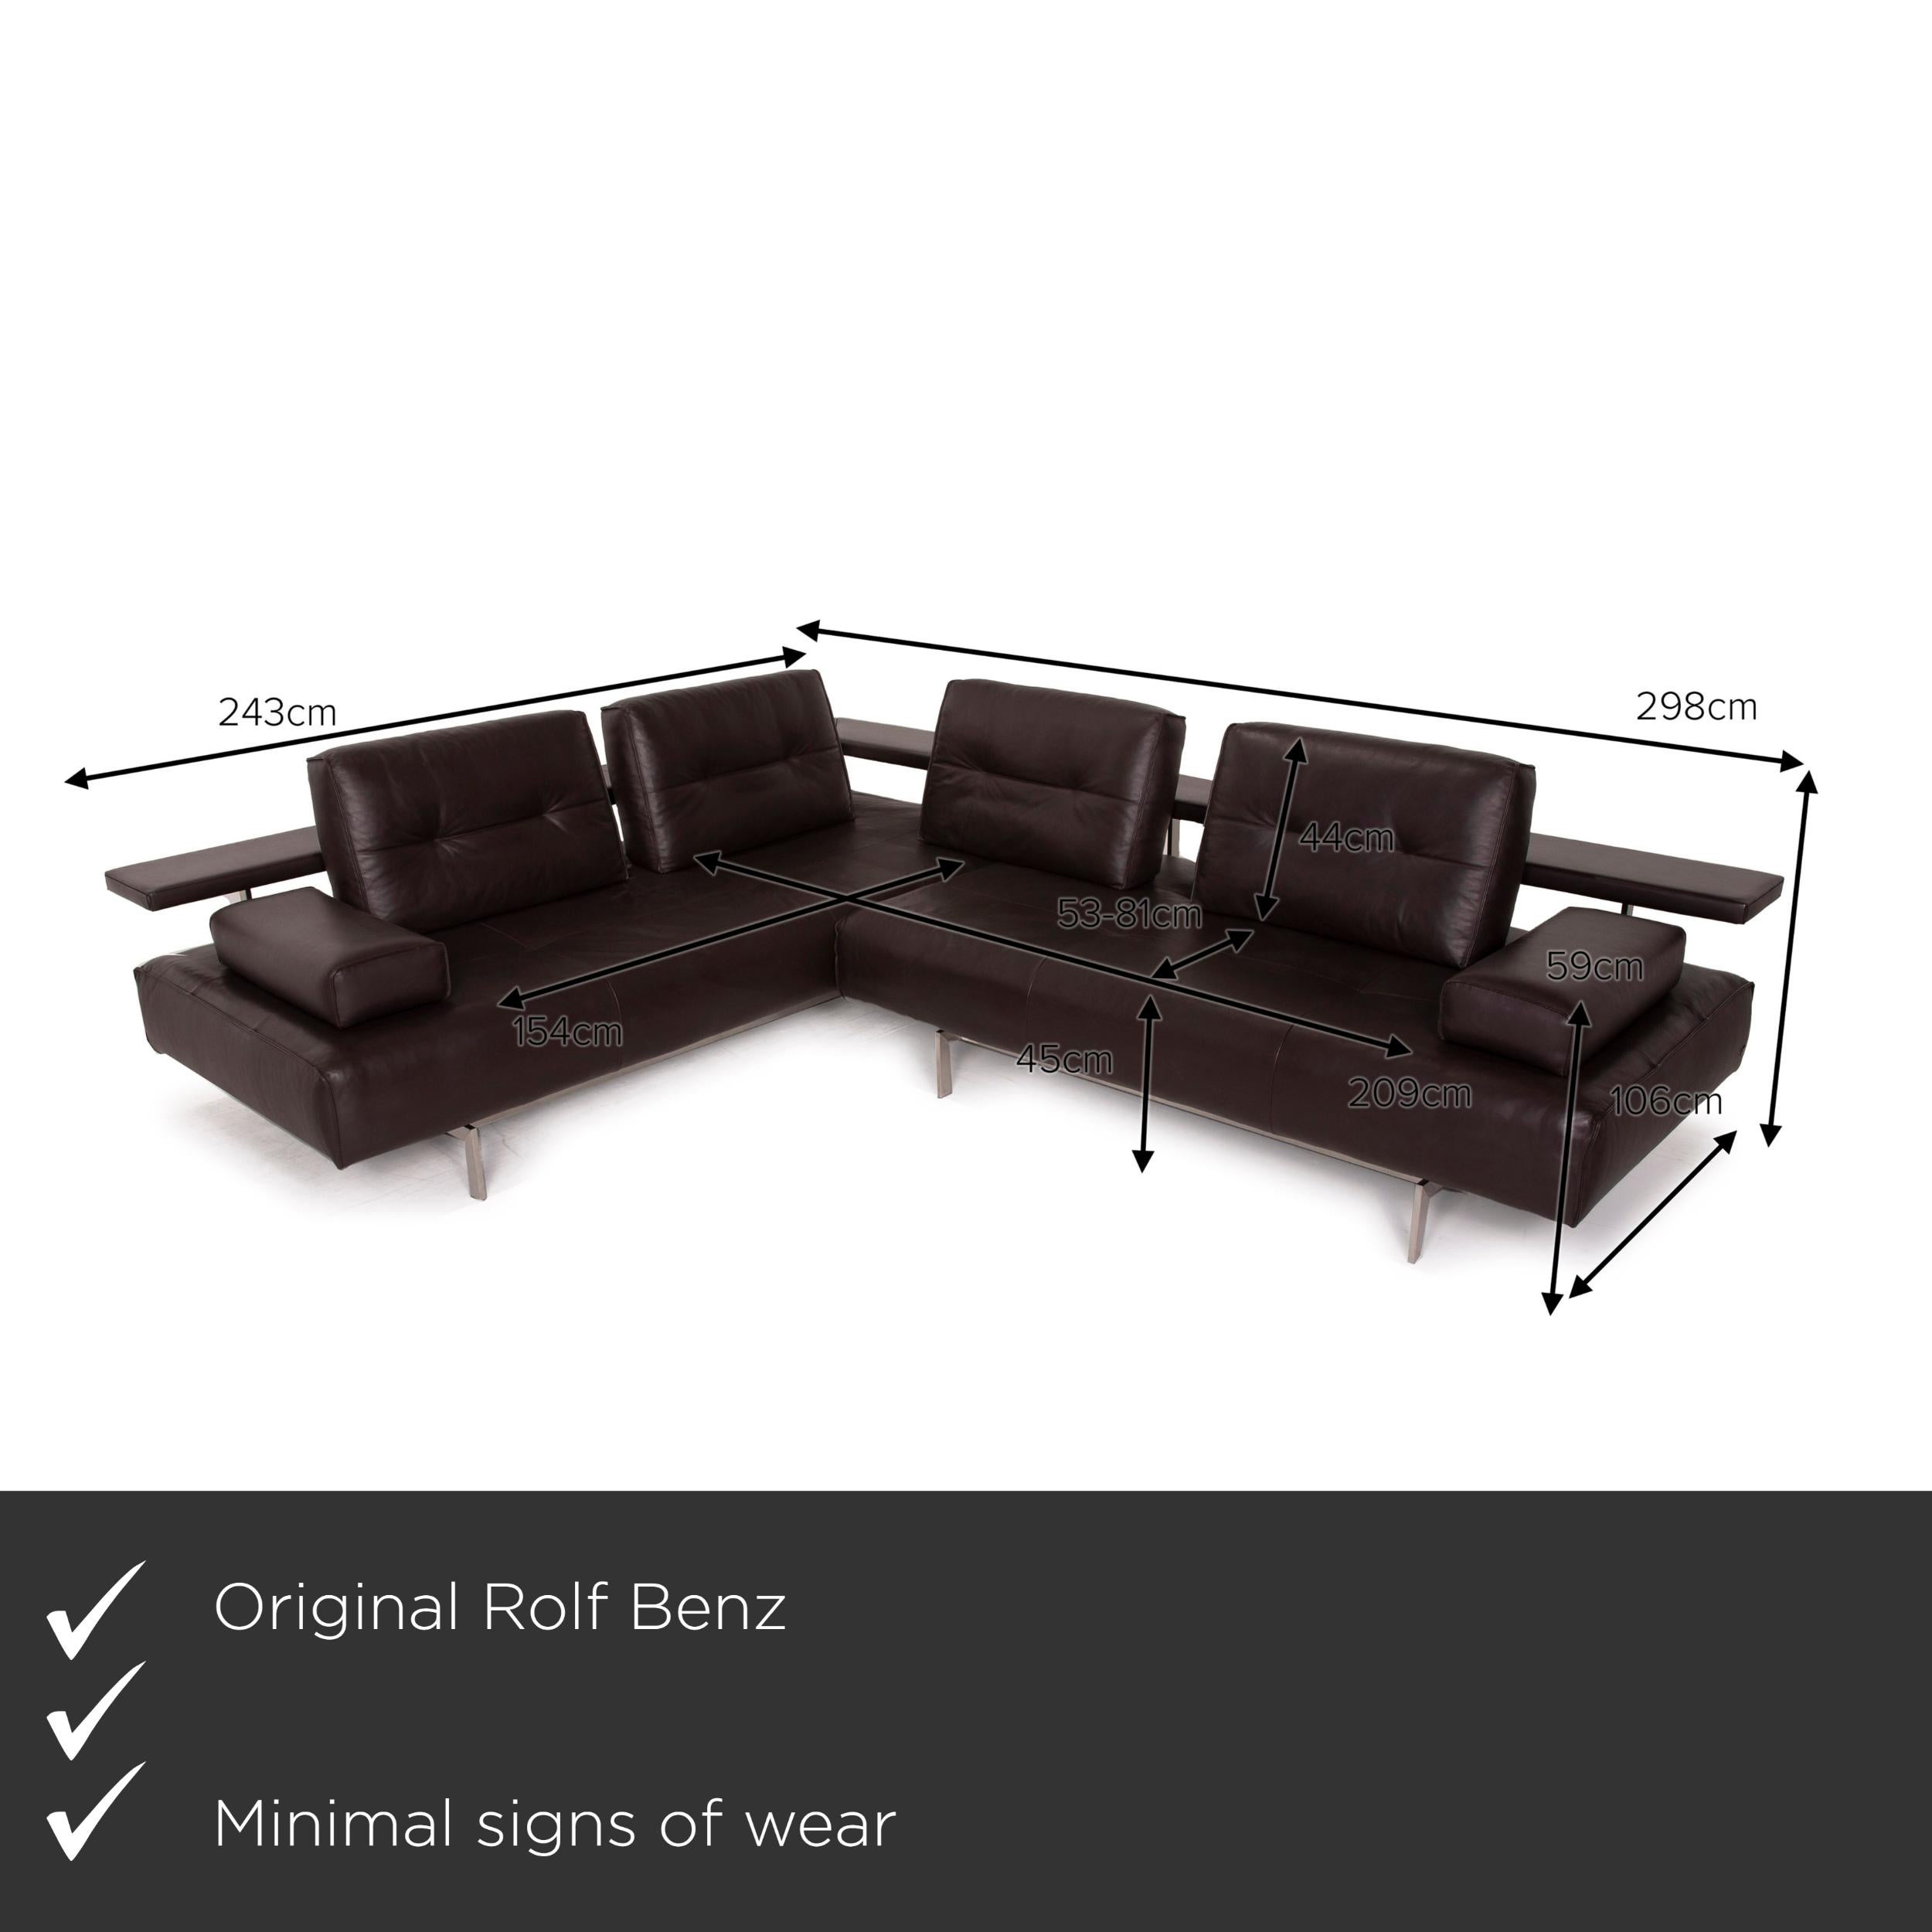 We present to you a Rolf Benz Dono leather sofa brown Corner sofa function dark brown.
 

 Product measurements in centimeters:
 

Depth: 107
Width: 243
Height: 88
Seat height: 45
Rest height: 59
Seat depth: 53
Seat width: 154
Back